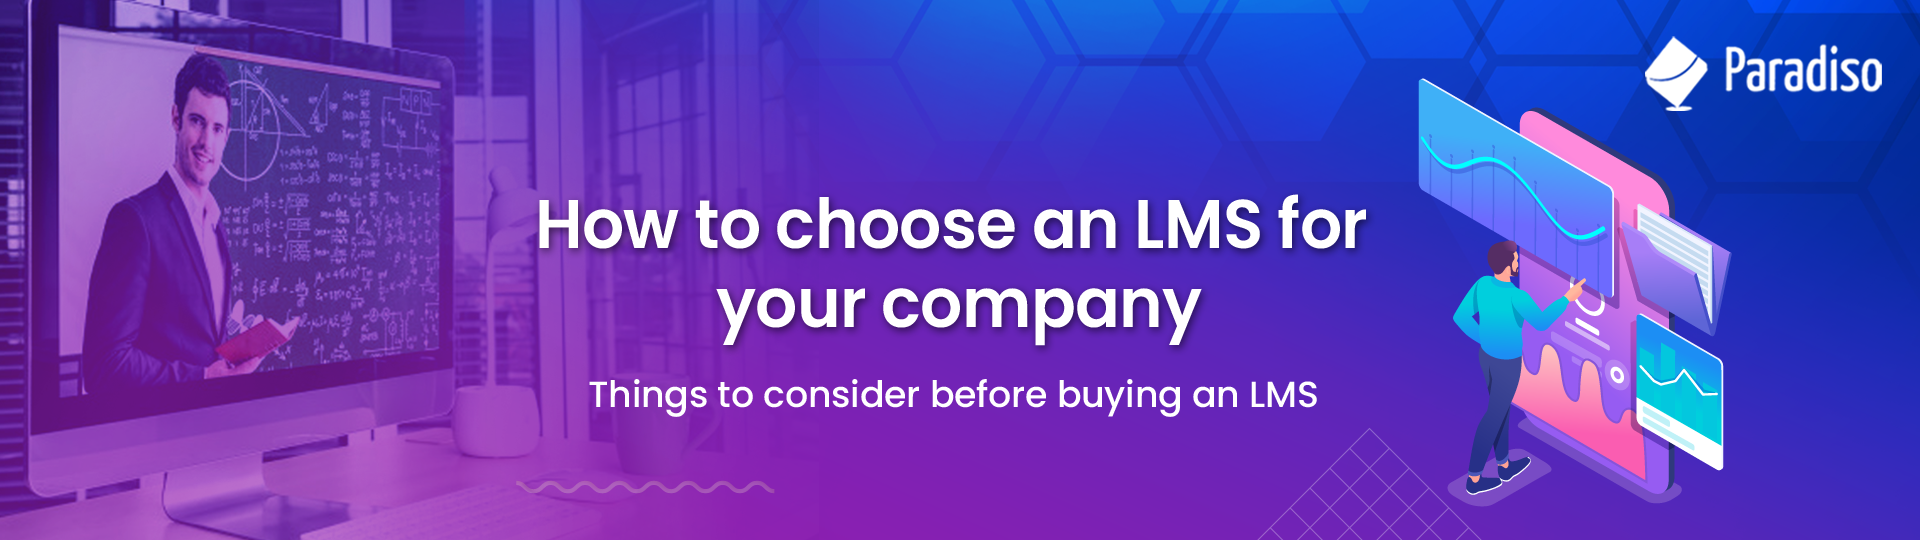 How to choose an lms for your company